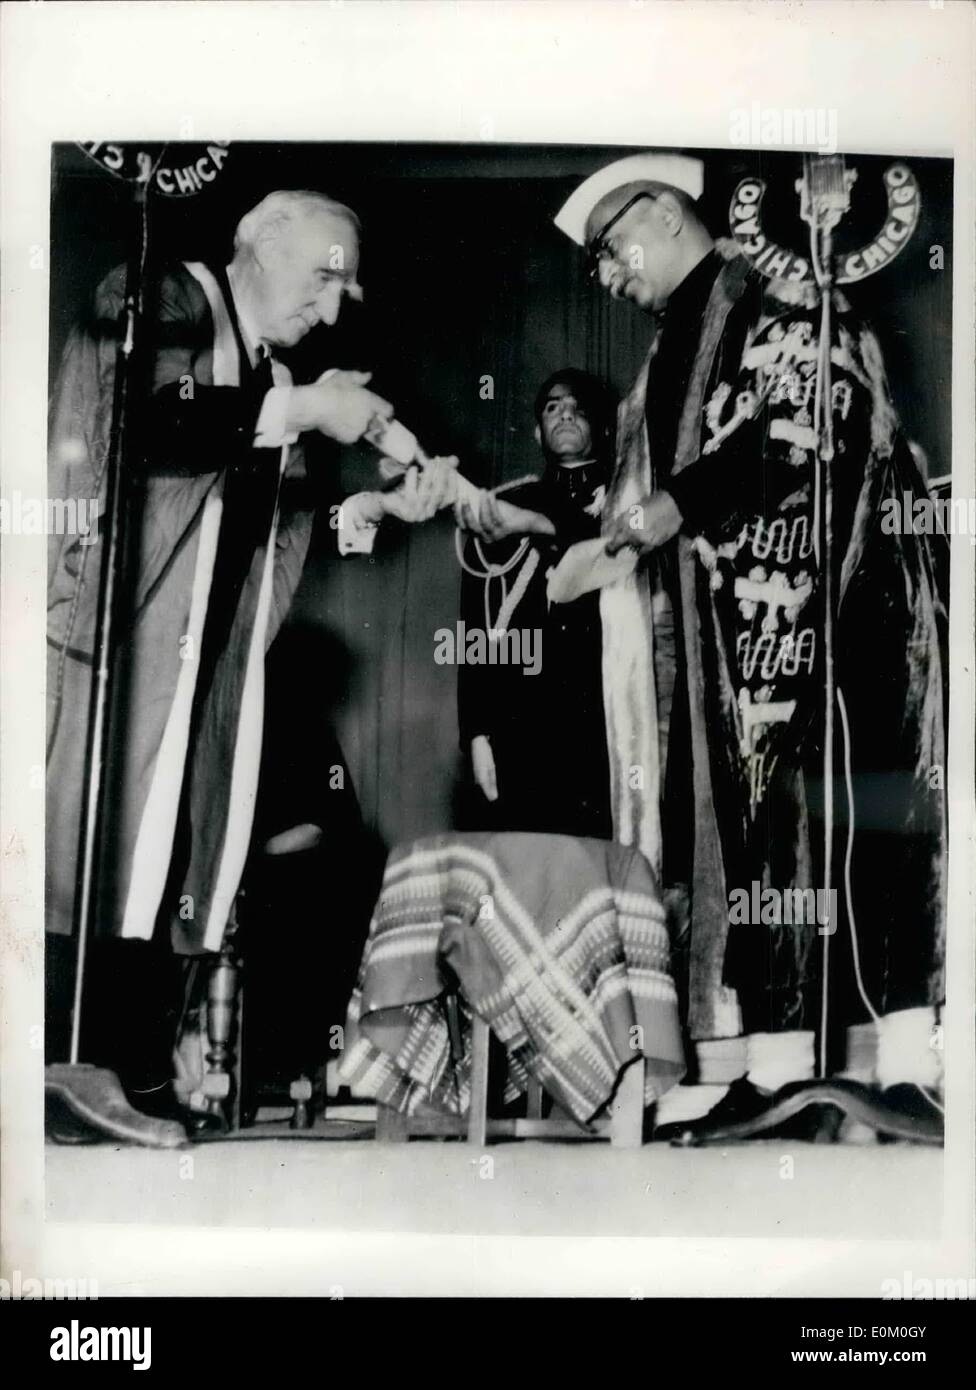 Jan. 01, 1953 - Lord Boyd - ORR Receives Honorary Degree Of Doctor Of Science In Delhi University: At a special convention of the Delhi University recently - Dr. Rajendra Prasad, the Chancellor of the University conferred the honorary degree of Doctor of Science on Lord Boyd Orr. Photo Shows The scene as Dr. Prasad confers the degree on Loyd Boyd - Orr at Delhi University. Stock Photo